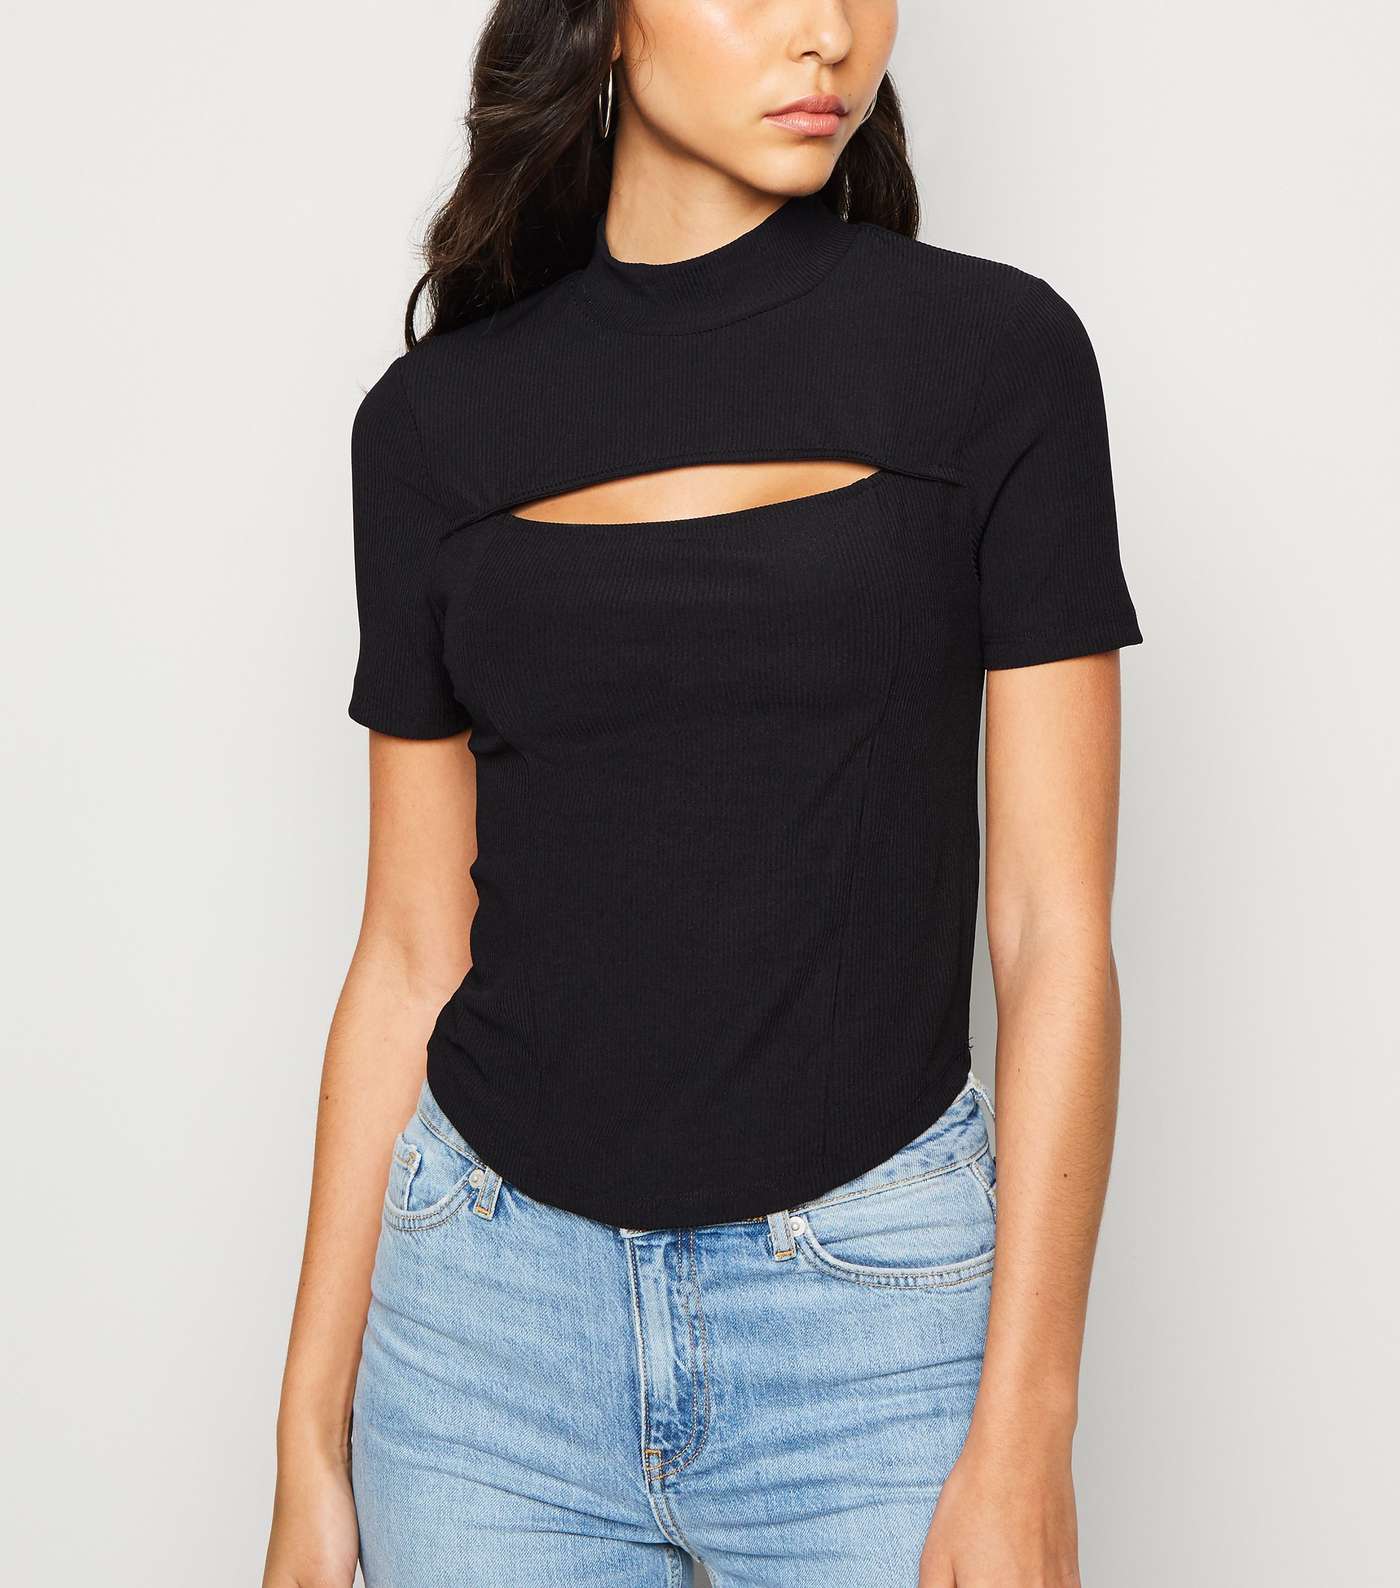 Black Ribbed Cut Out Panel Top